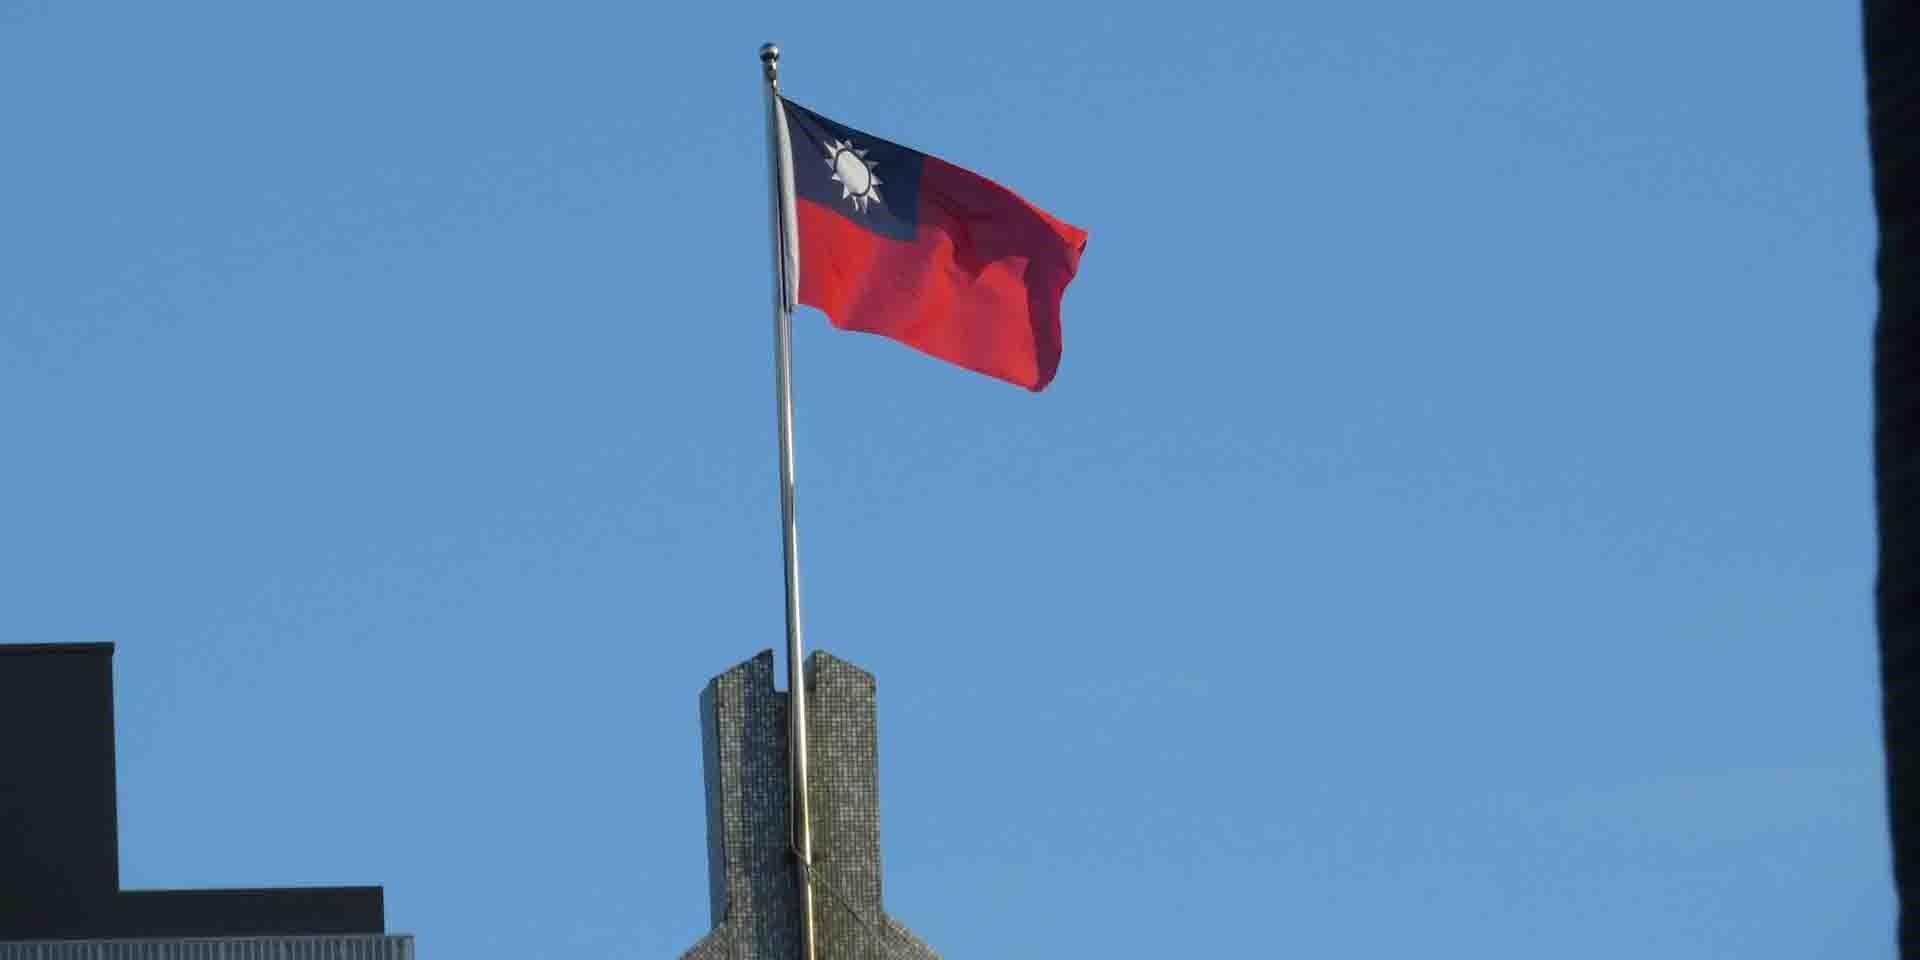 An image of the Taiwanese flag